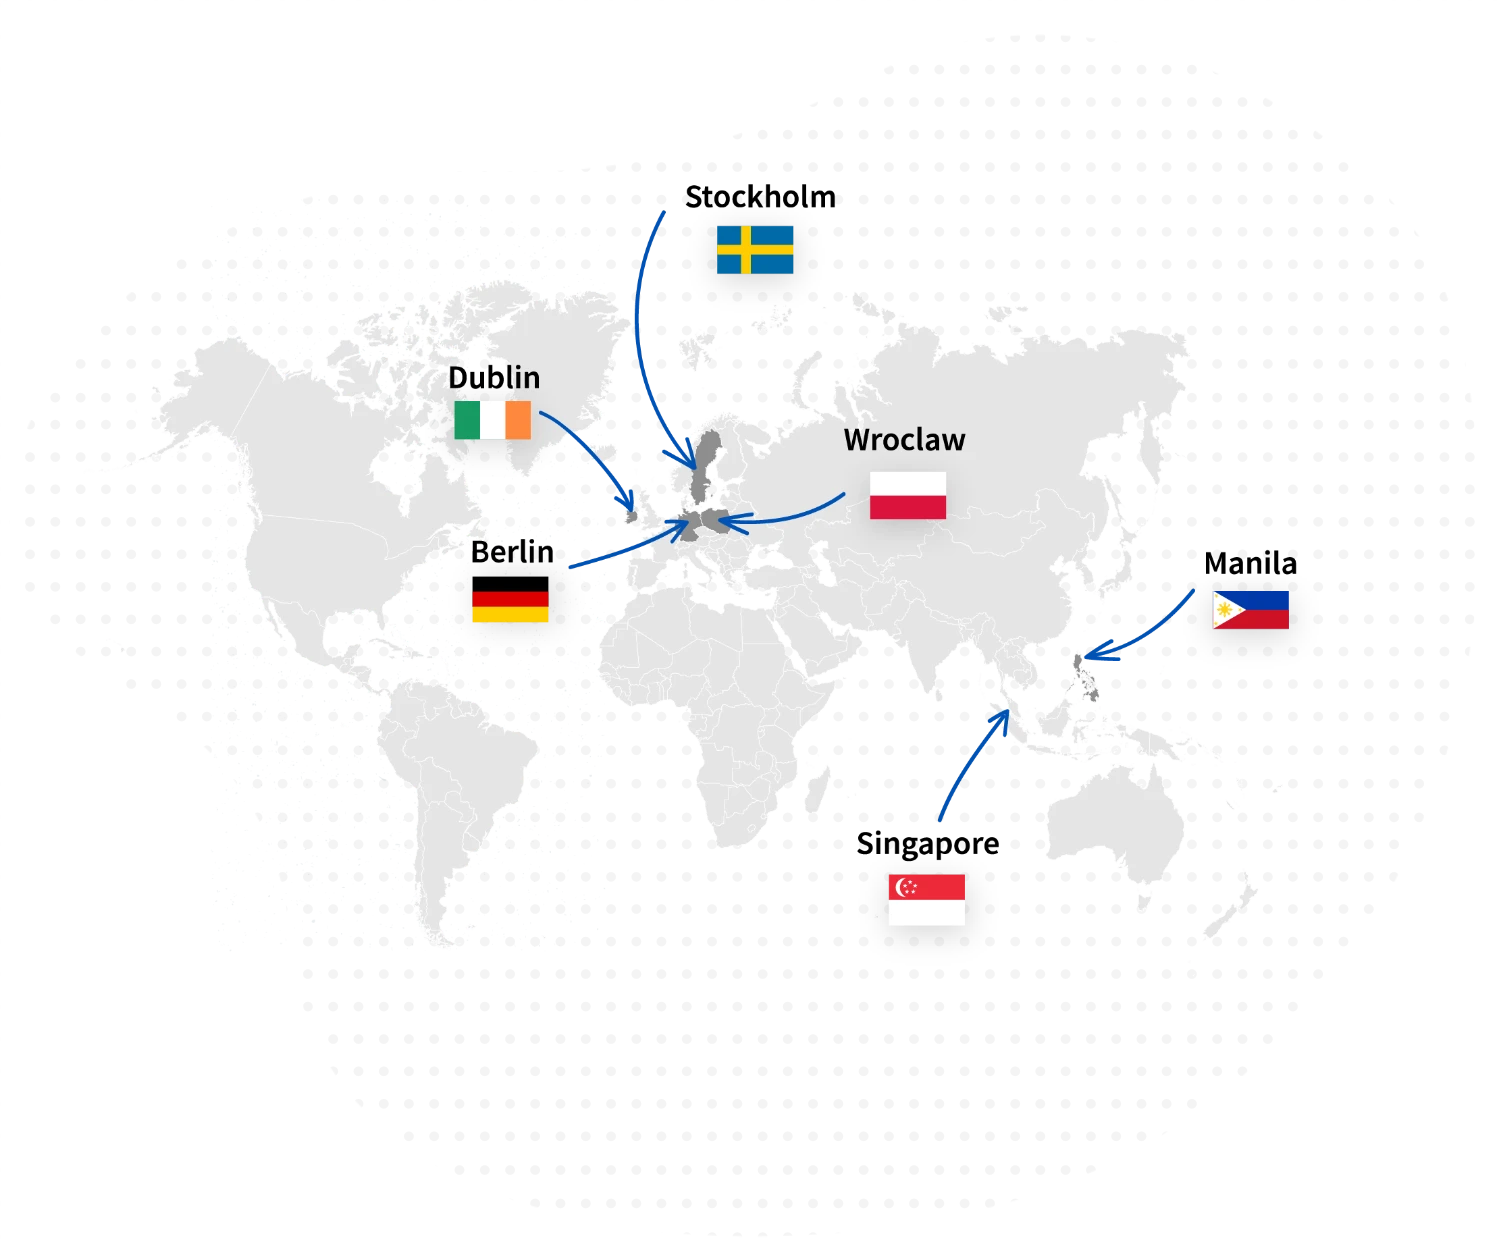 Partners map